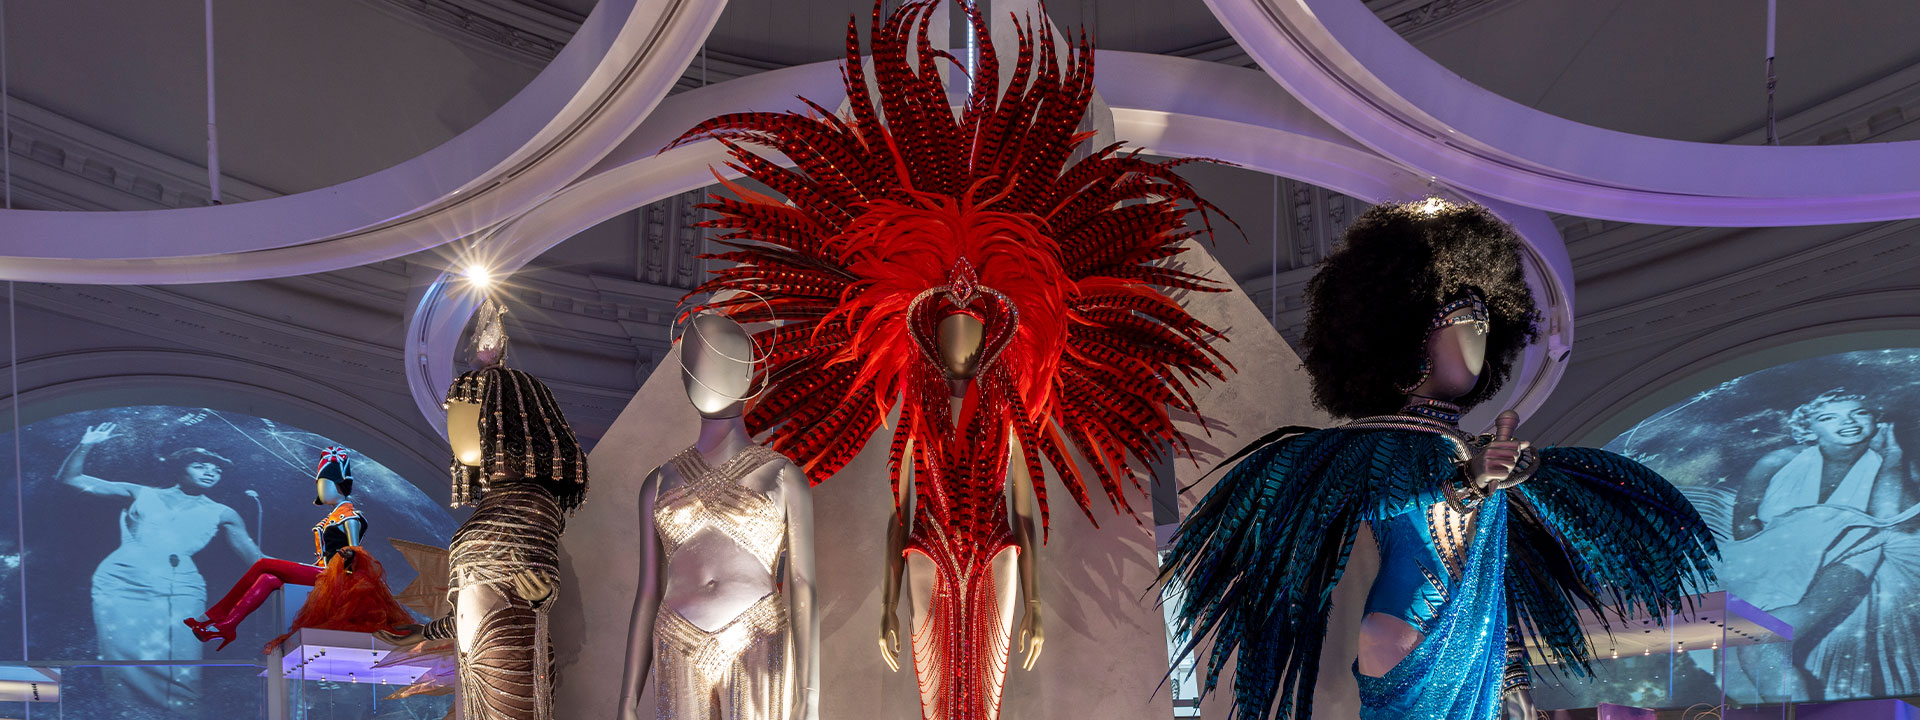 Mannequin in red feather and sequin outfit in V&A exhibition